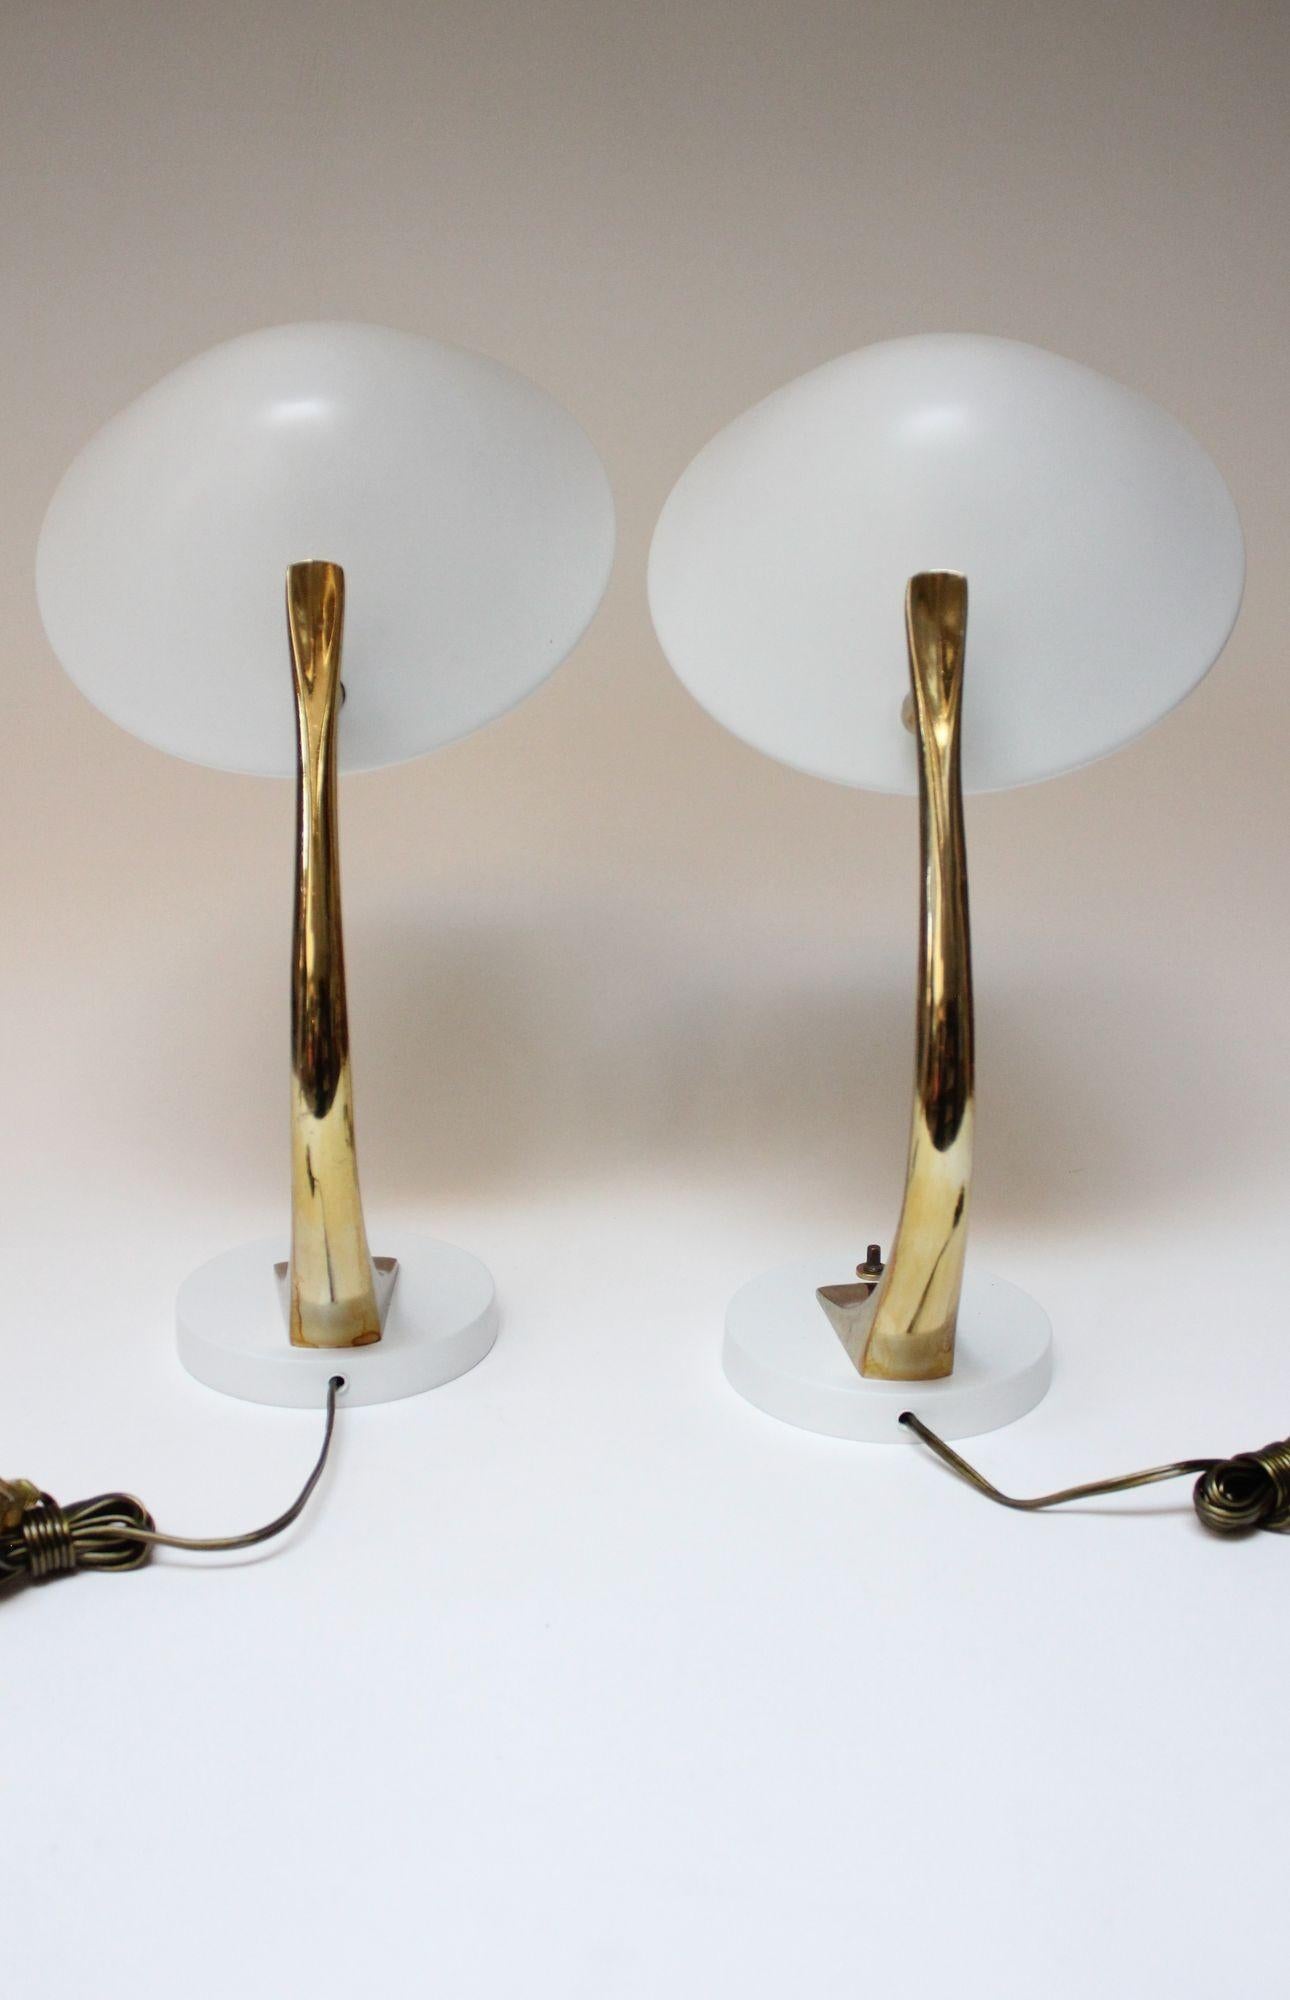 Pair of Sculptural Adjustable Metal and Brass Finish Table Lamps by Laurel In Good Condition For Sale In Brooklyn, NY